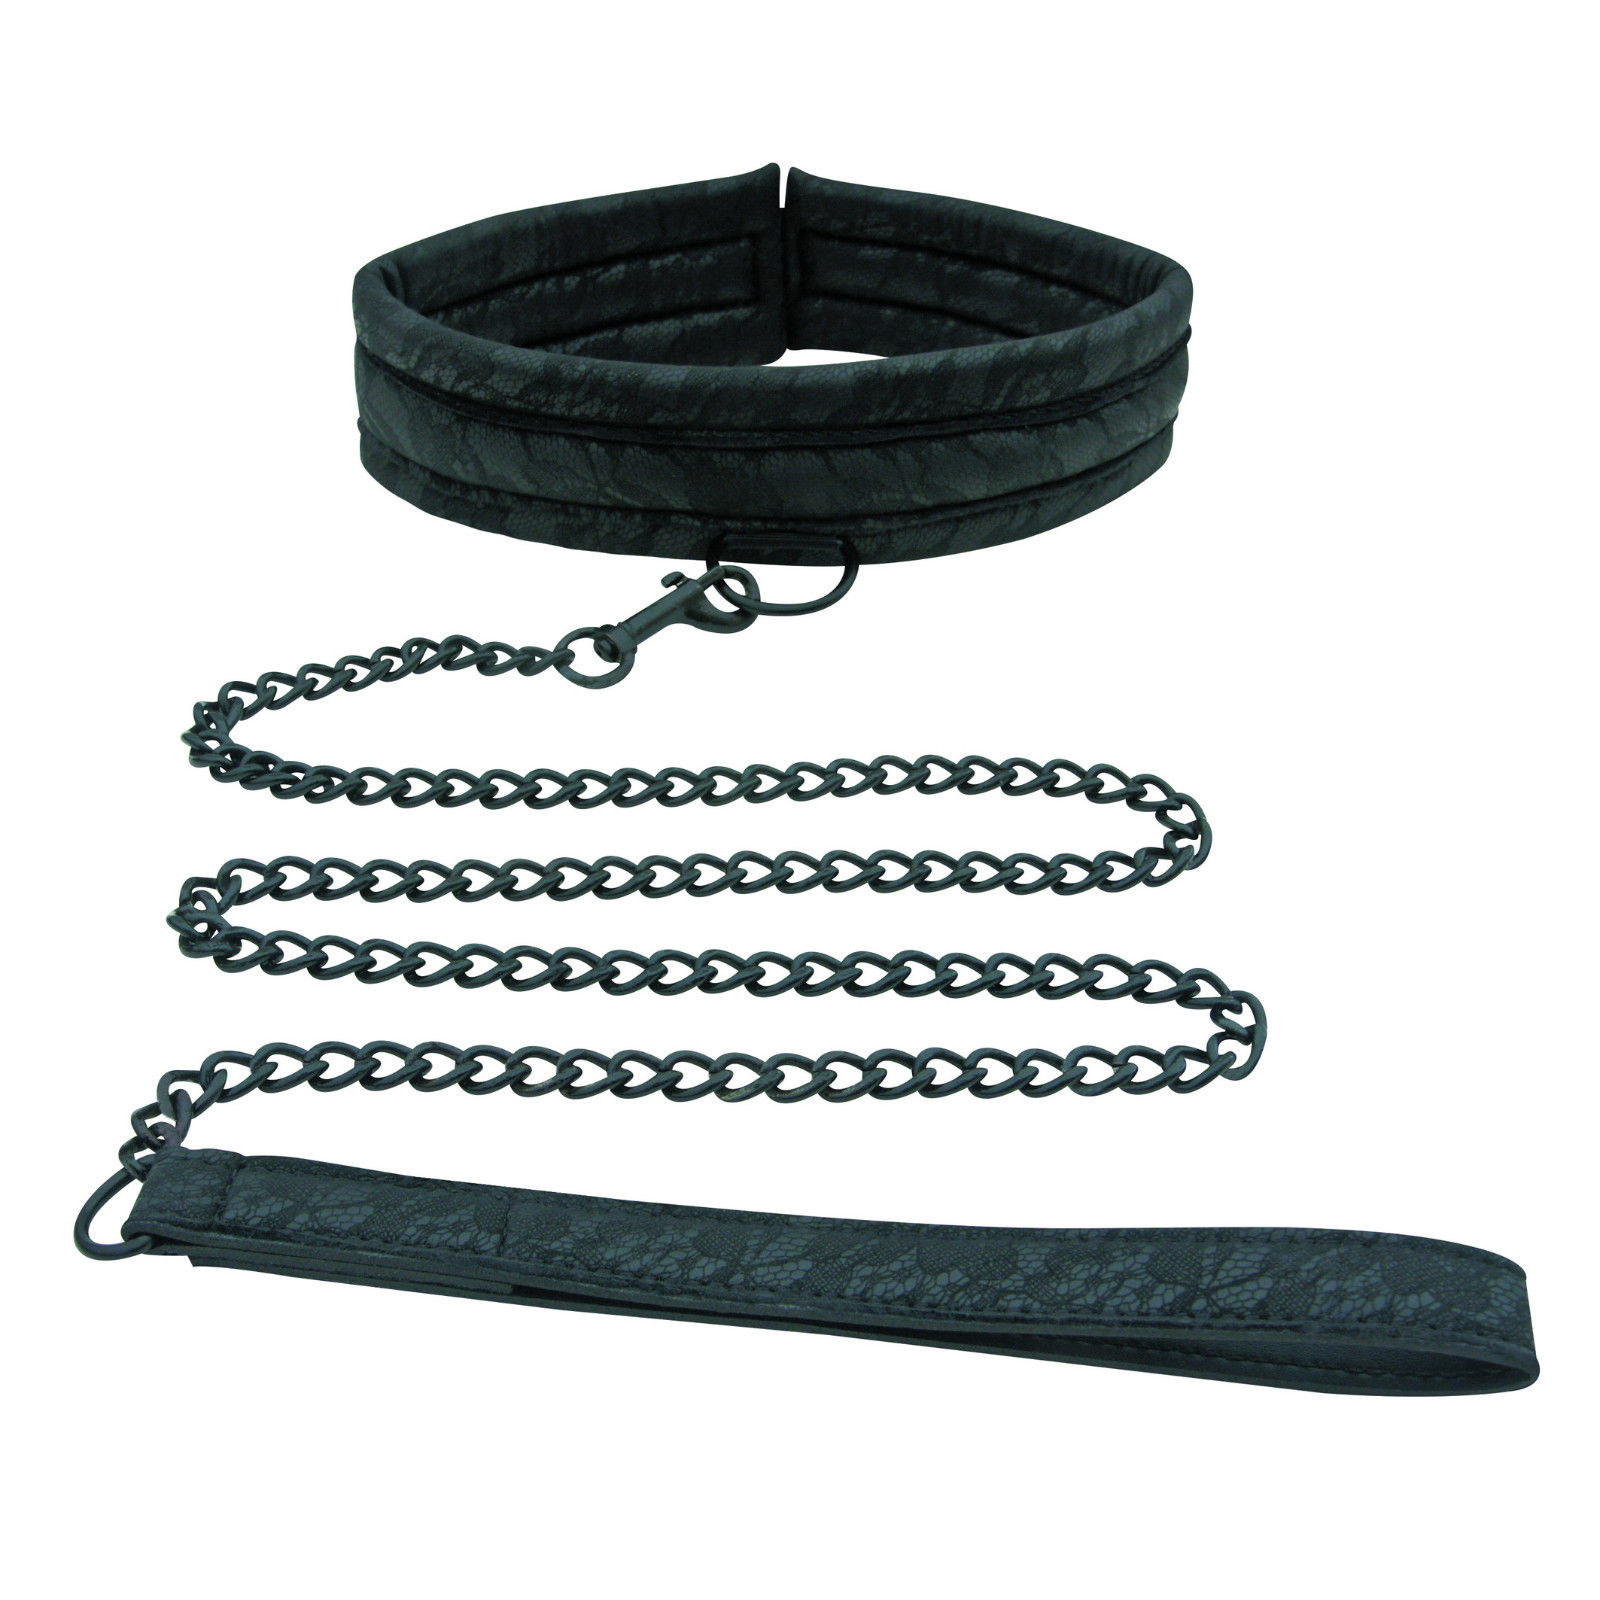 the sincerely collar and leash